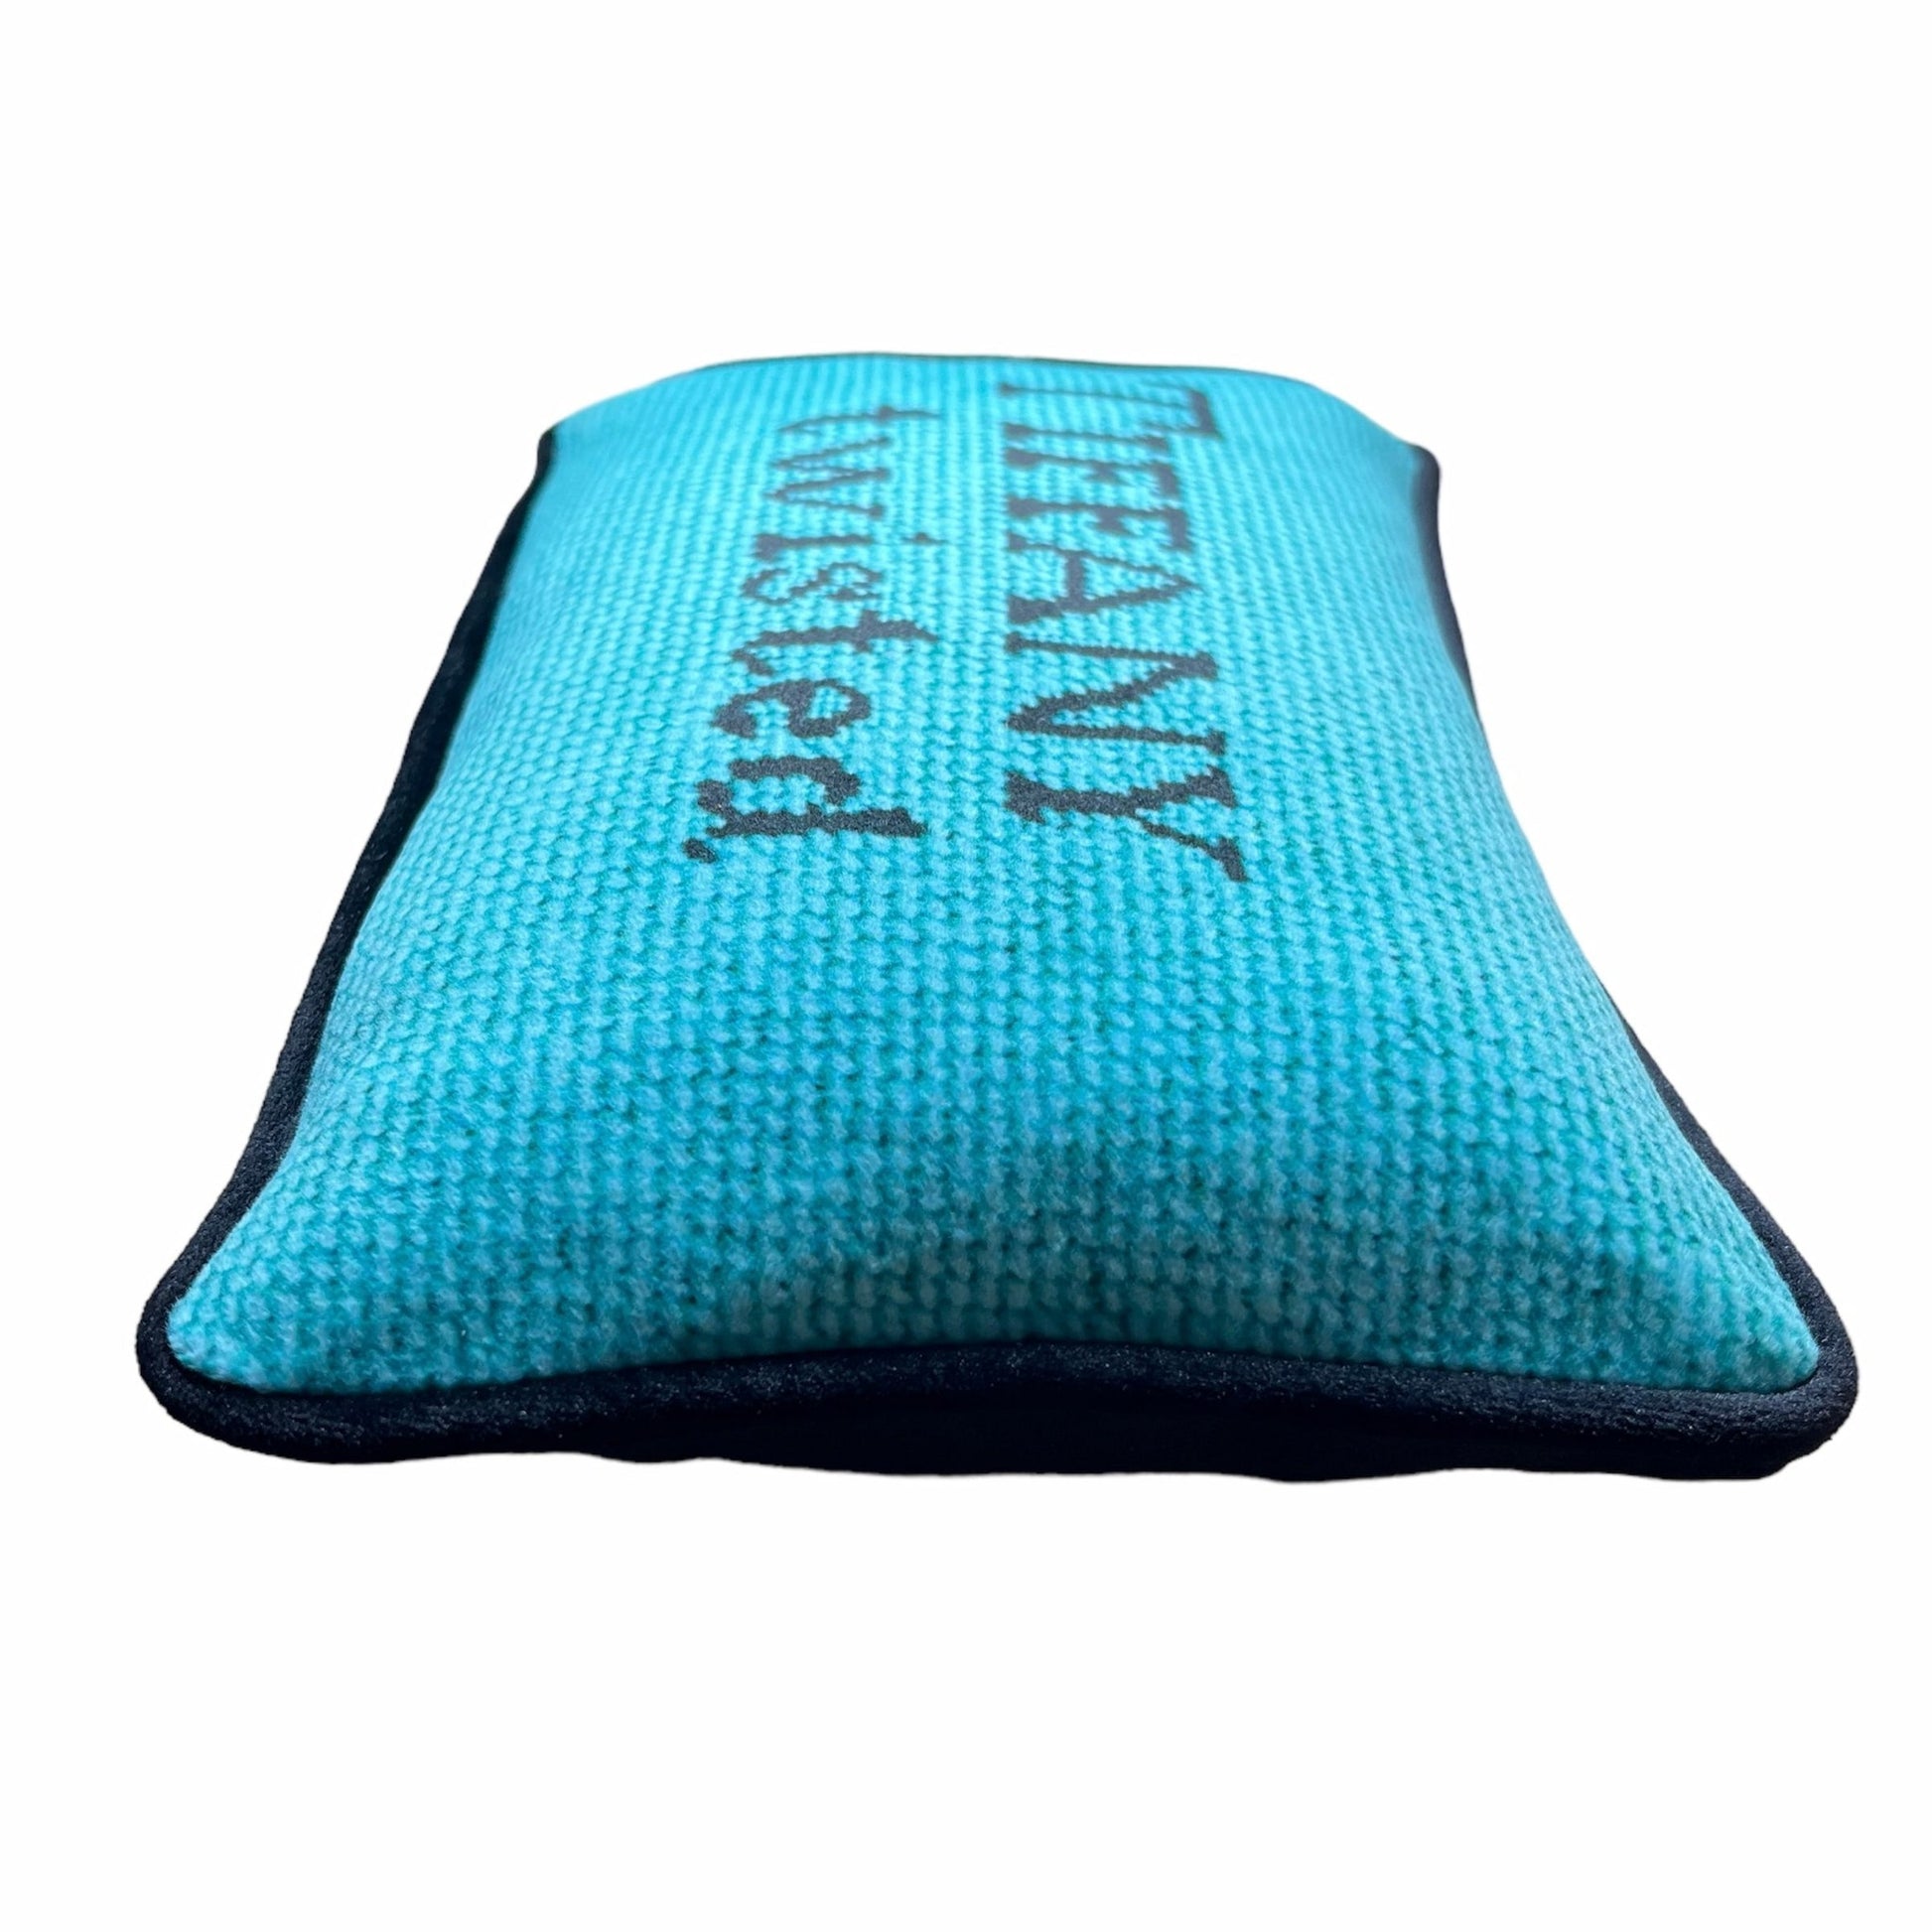 Tiffany blue pillow with black letters reading "Tiffany Twisted"